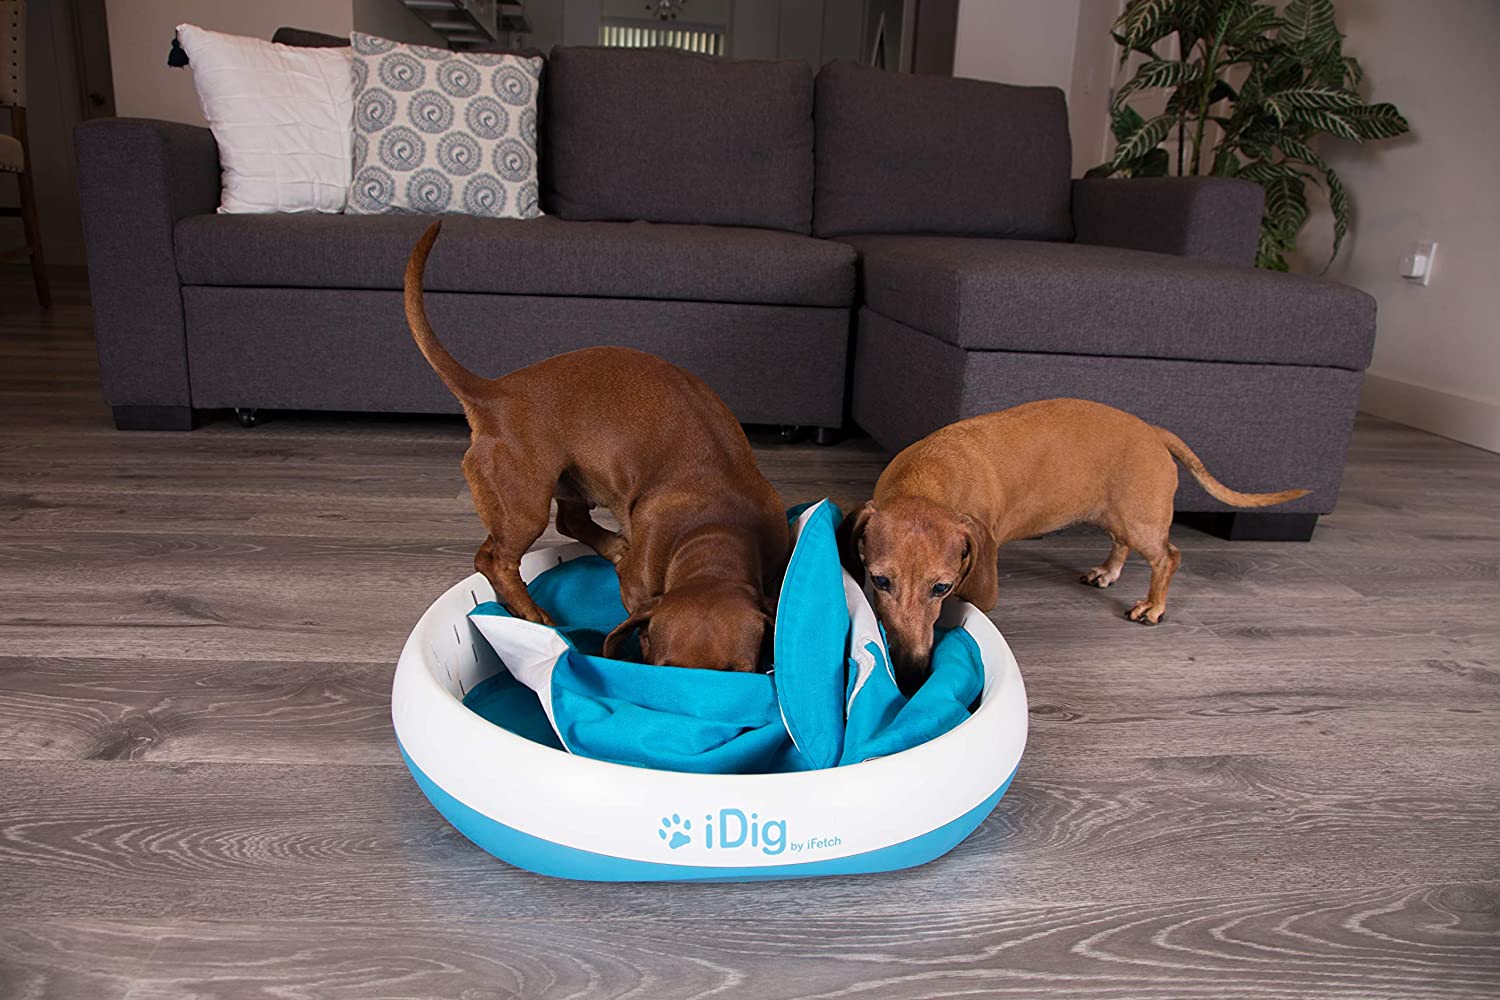 This Ingenious Dog Digging Toy Helps Satisfy Your Dogs Need To Dig